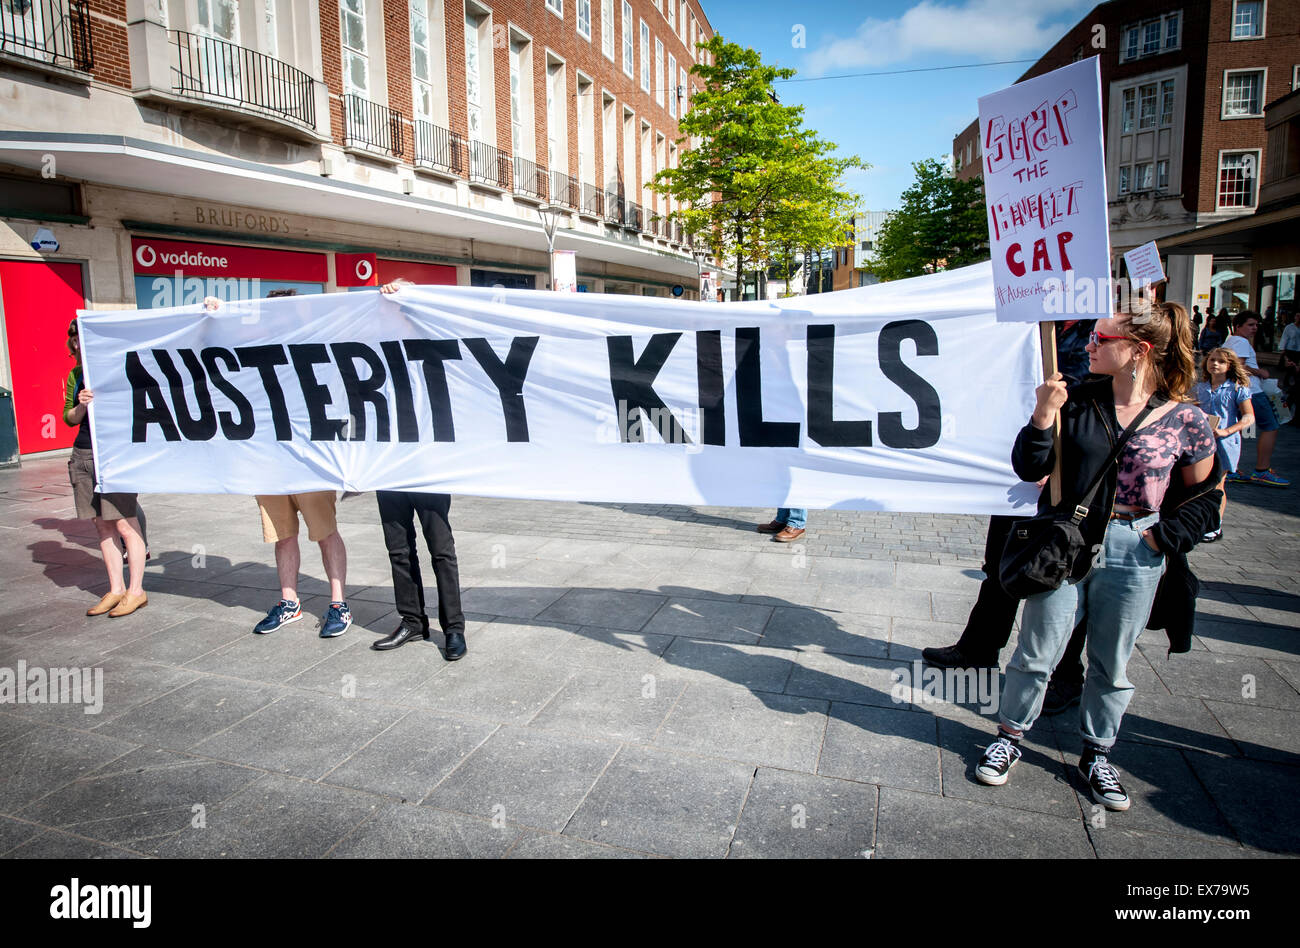 Exeter, Devon, UK. 8th July, 2015. The Austerity Kills banner is held up during the Exeter Budget Day Action #AusterityKills in Exeter City Centre on july 8th, 2015 in Bedford Square, Exeter, UK Credit:  Clive Chilvers/Alamy Live News Stock Photo